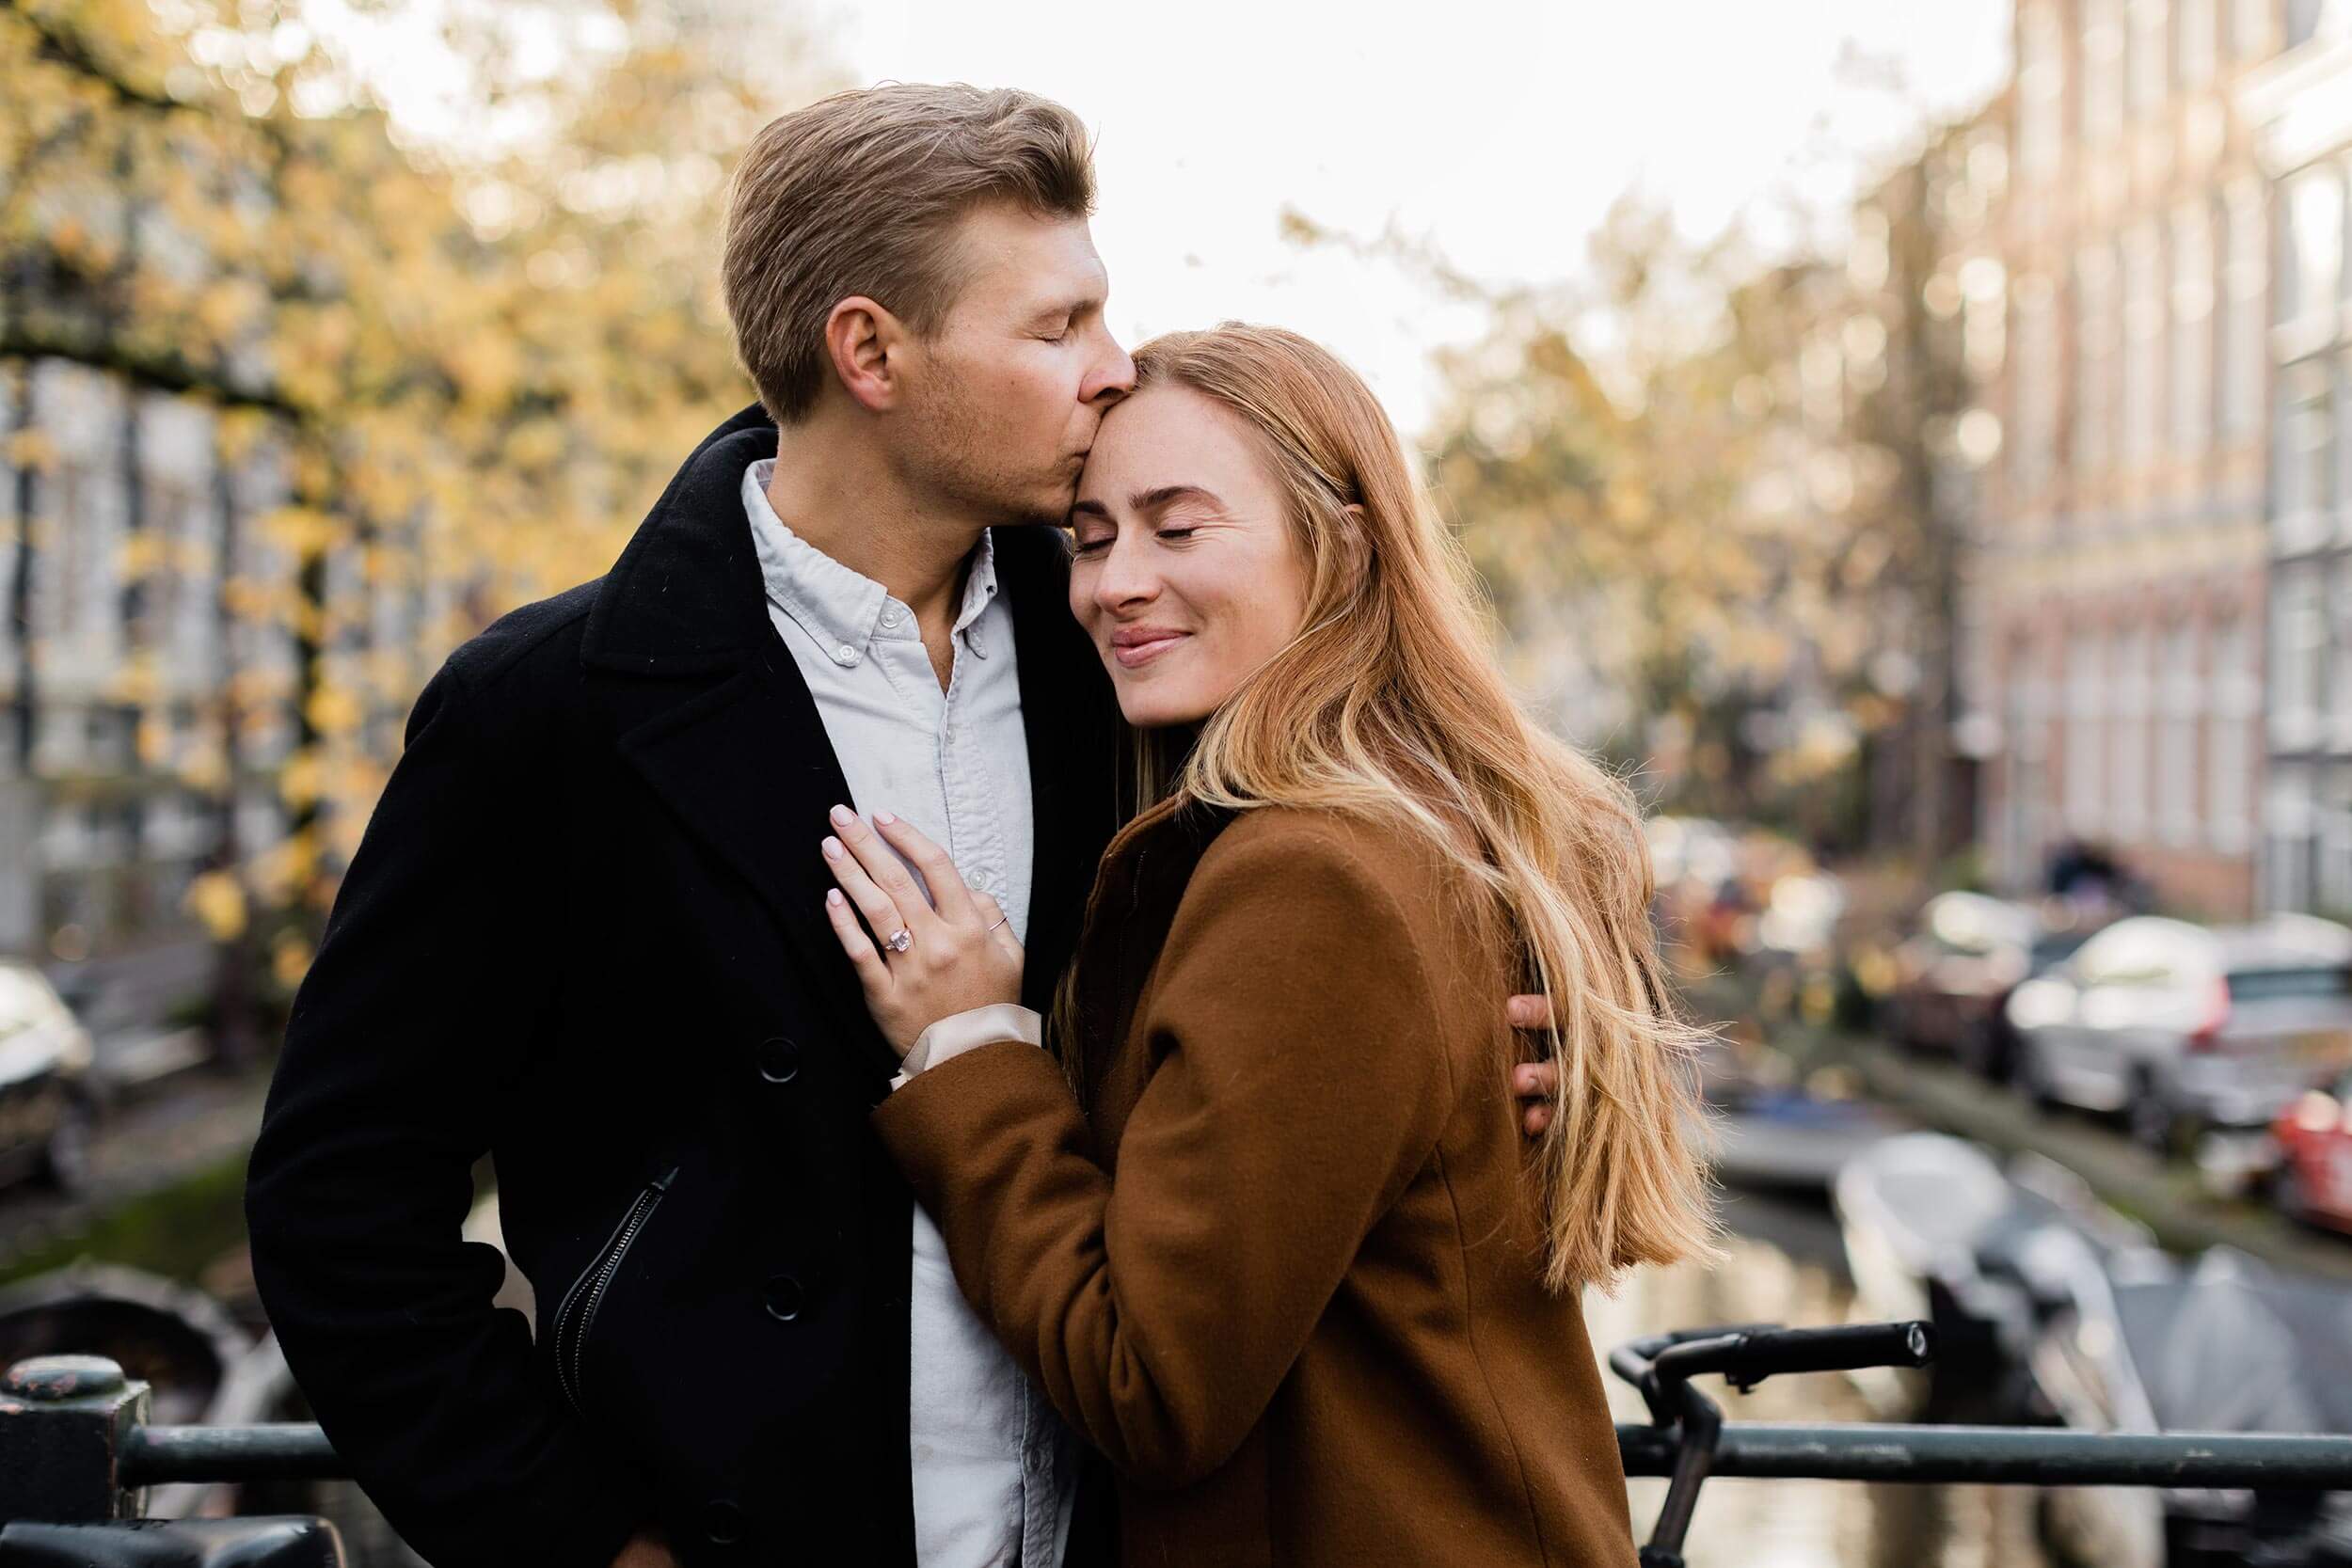 alt="lovers embrace in Amsterdam after surprise proposal in Amsterdam"